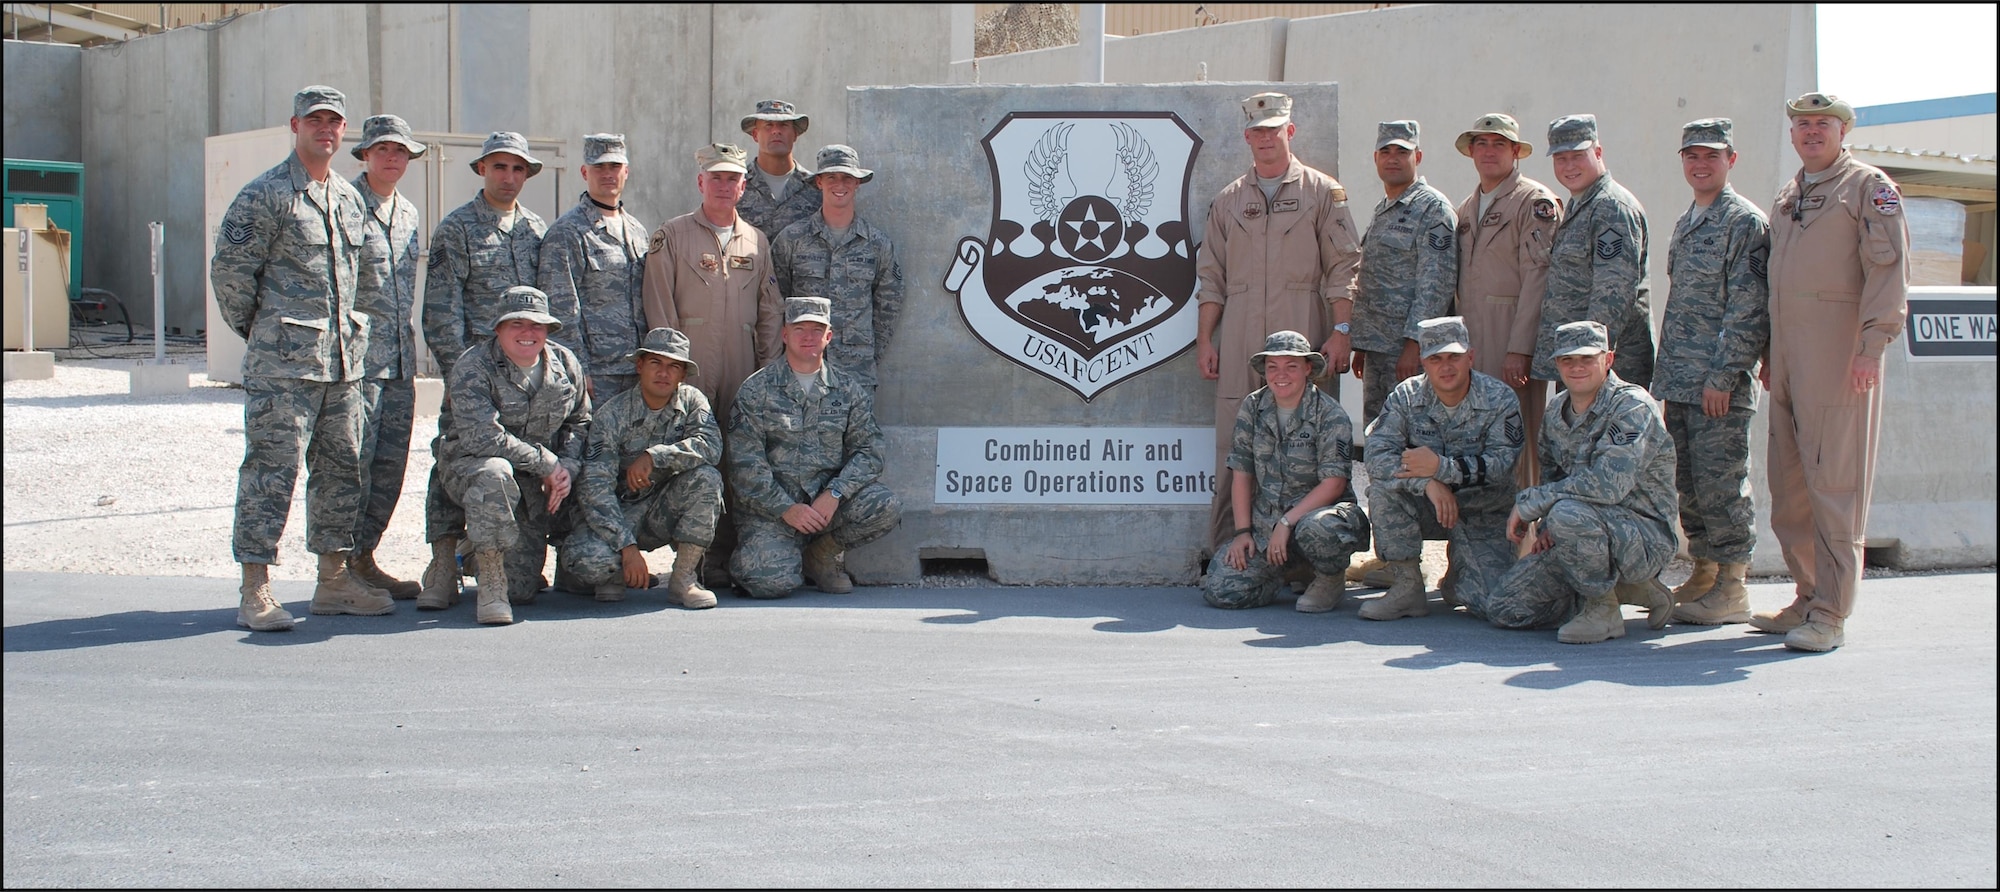 Maj. Robert O'Connor, 2nd Lt. Chad Montague, Master Sgt. Dan Hughes and Staff Sgt. Tim D'Amico of the 103rd Air intelligence Squadron and Master Sgt. Ben Abbot and Master Sgt. Pete Demakis of the 103rd Air Operations Squadron stand with their team members from the 710th Combat Operations Squadron and the 609th Air Operations Center Detachment 1 in front of the Combined Air Operations Center, Southwest Asia, early September 2009.  The team was tasked to field test command and control capabilities there.  (photo courtesy of 2nd Lt. Chad Montague)